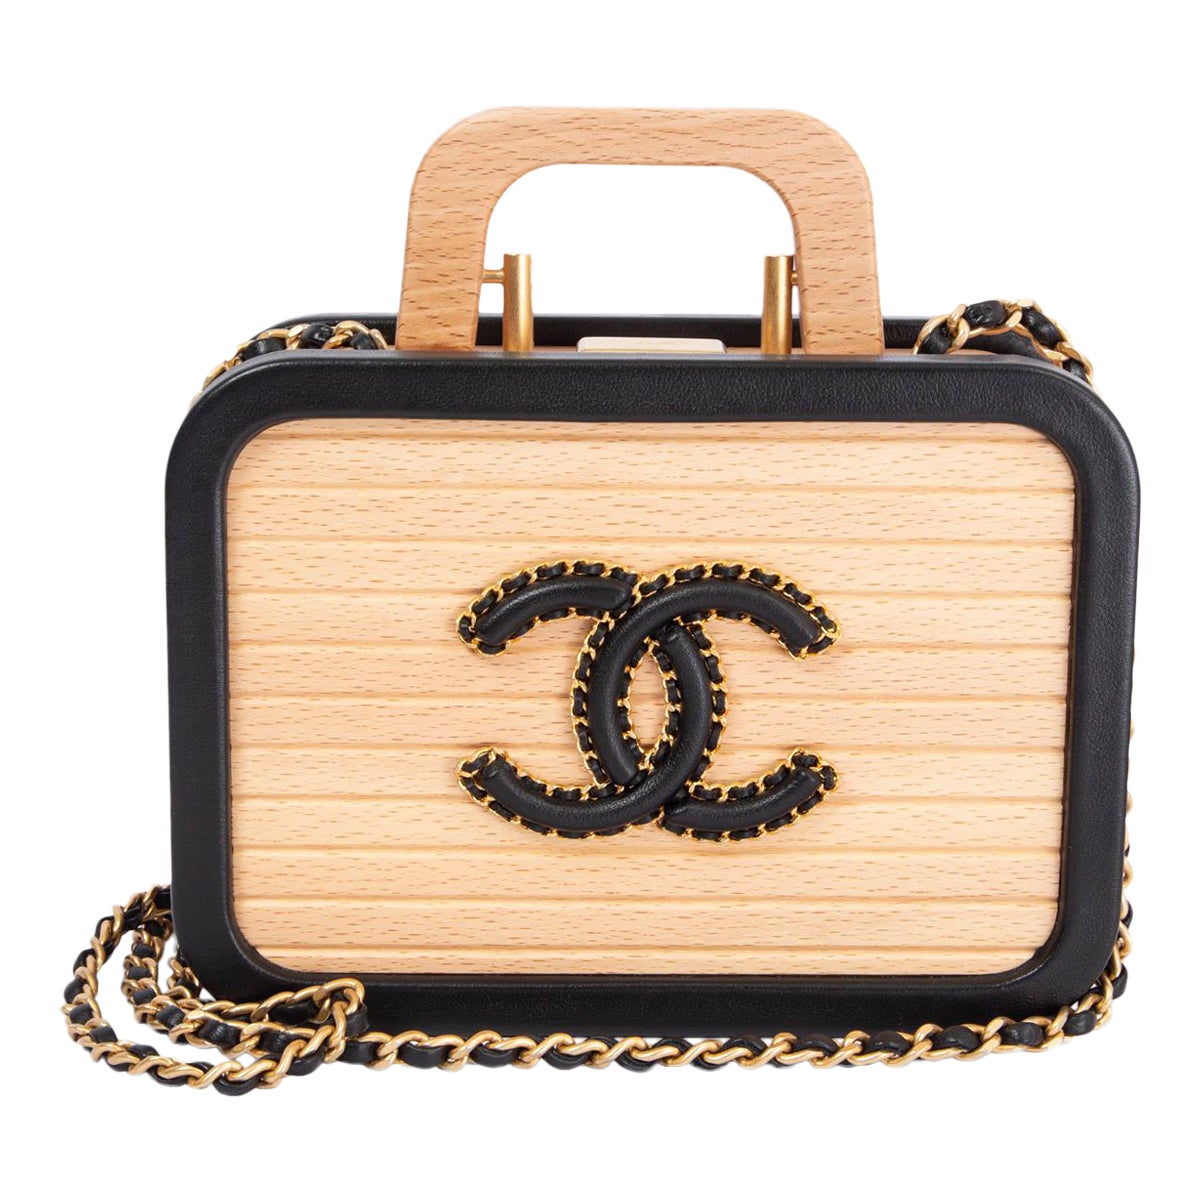 vanity with chain chanel